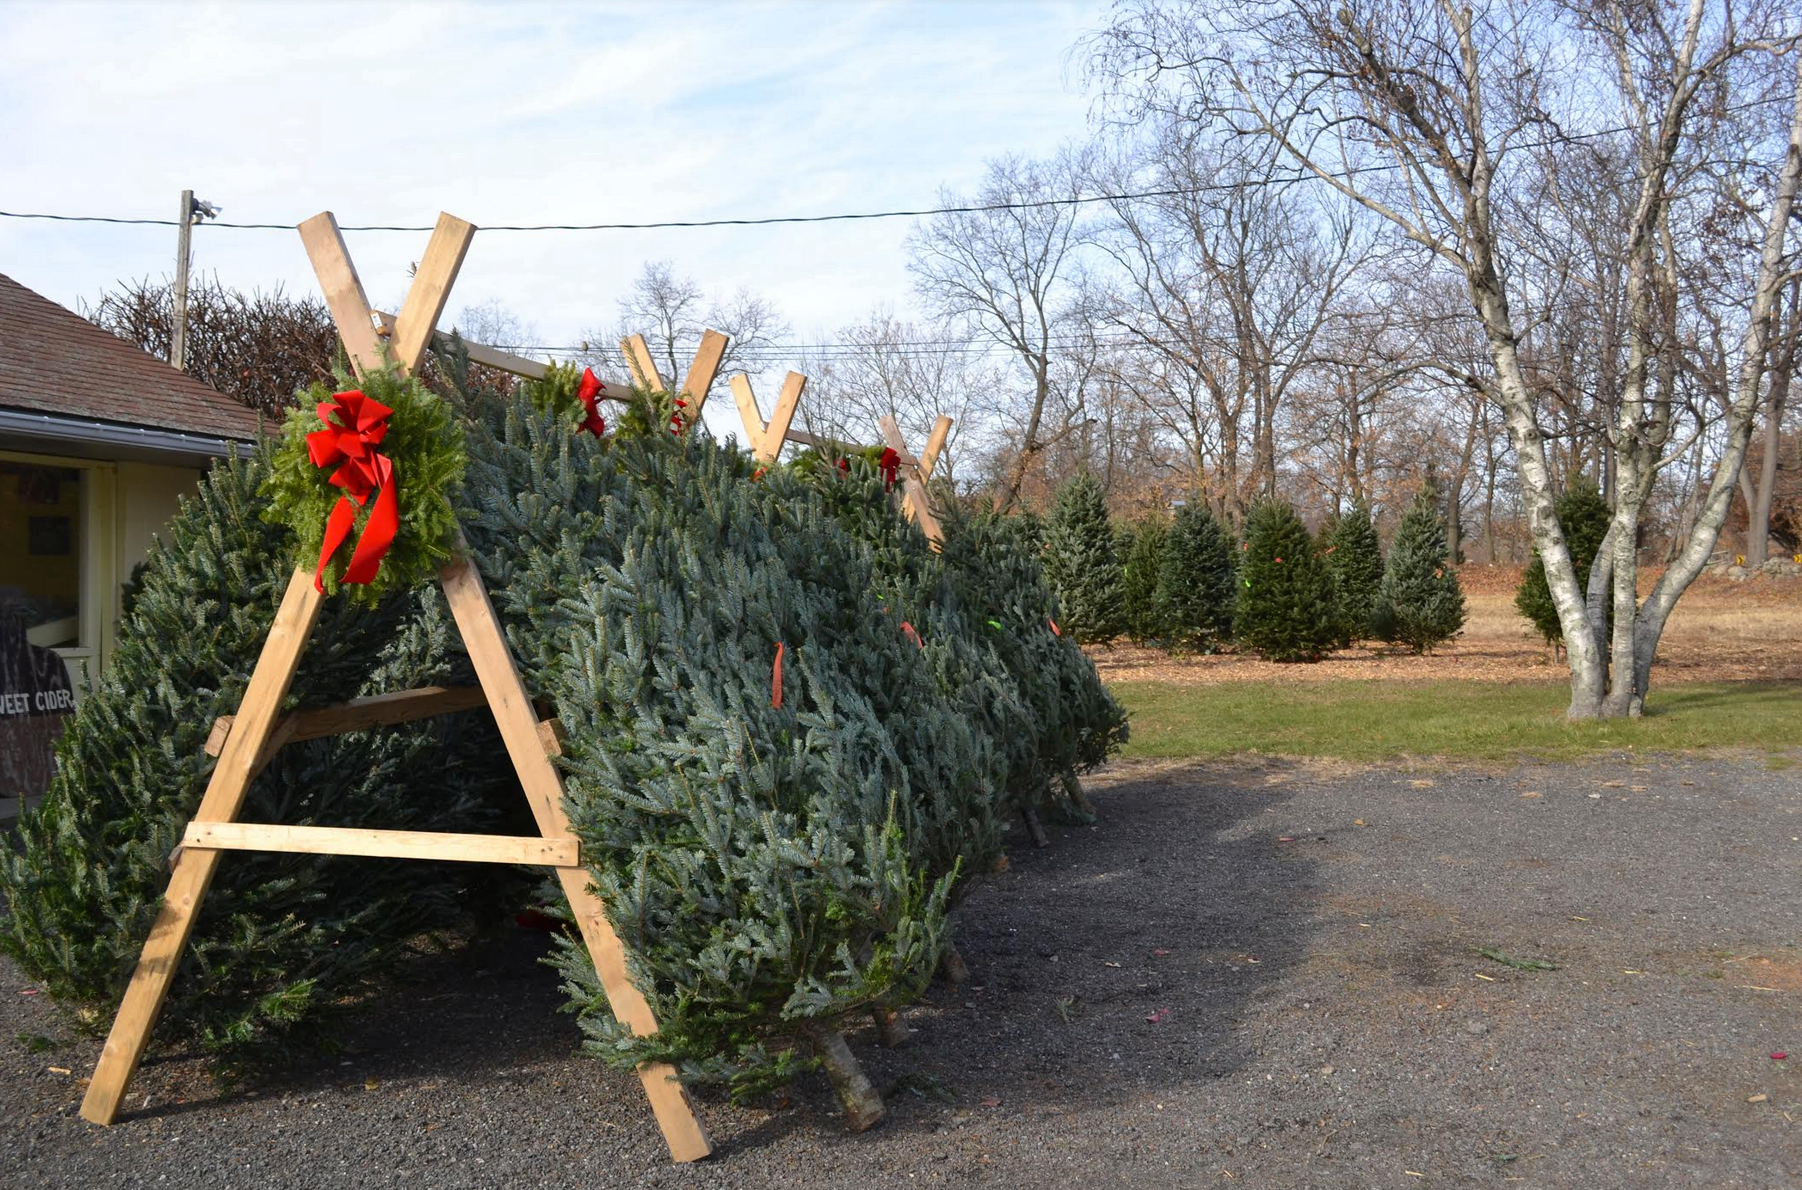 Augustine's Farm on King Street offers freshly cut Christmas trees, wreathes, pointsettias and more. Shop local.